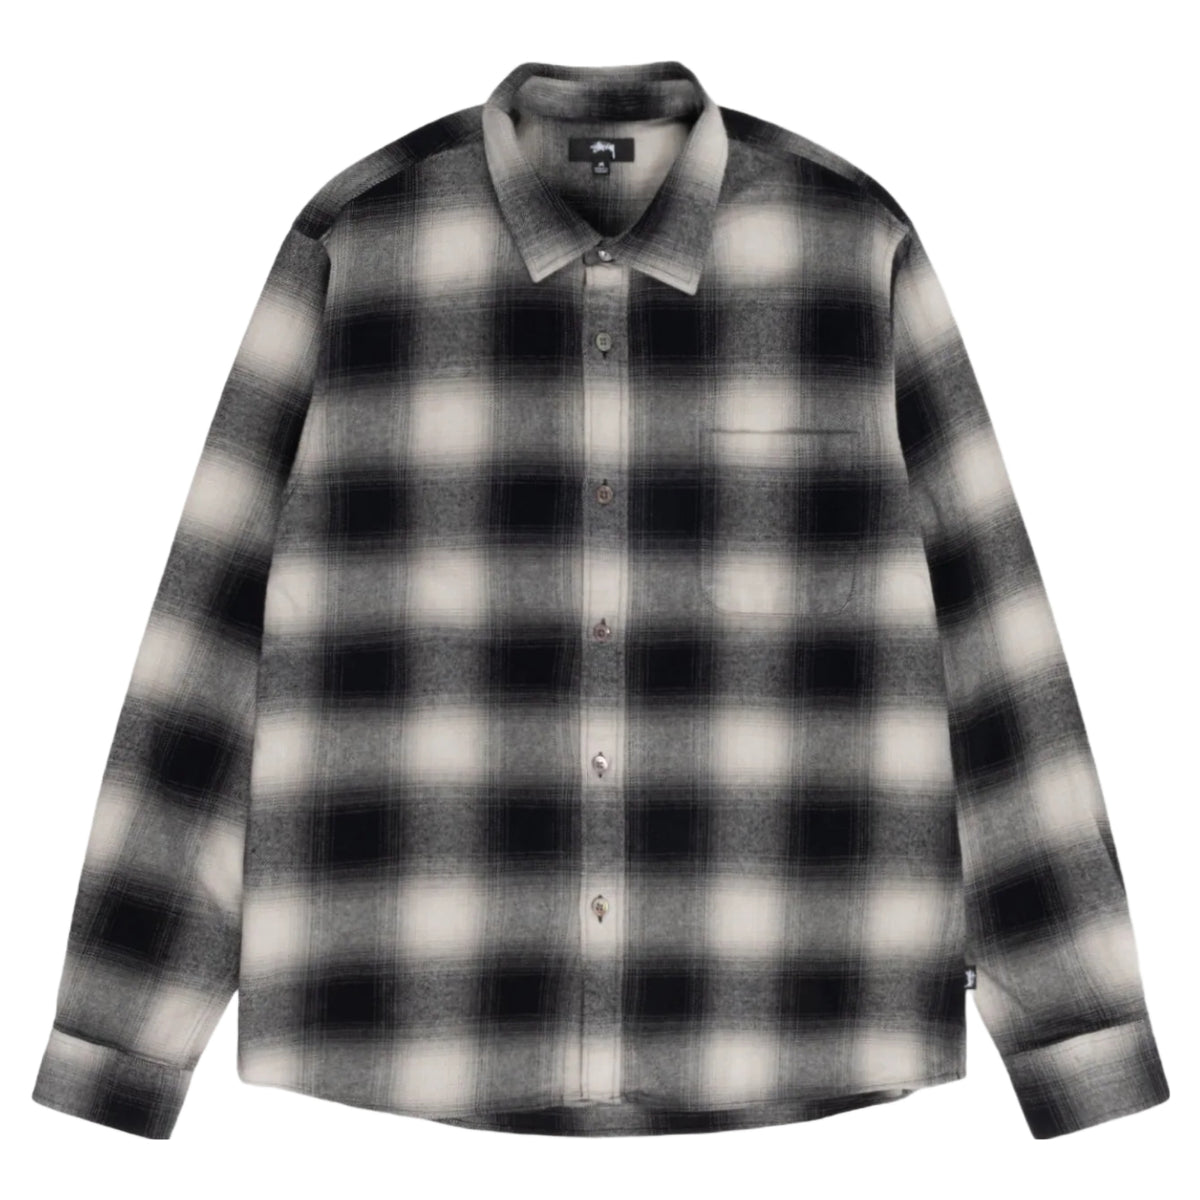 Shop Our Stussy Bay Plaid Shirt - Charcoal Stussy and Get the best